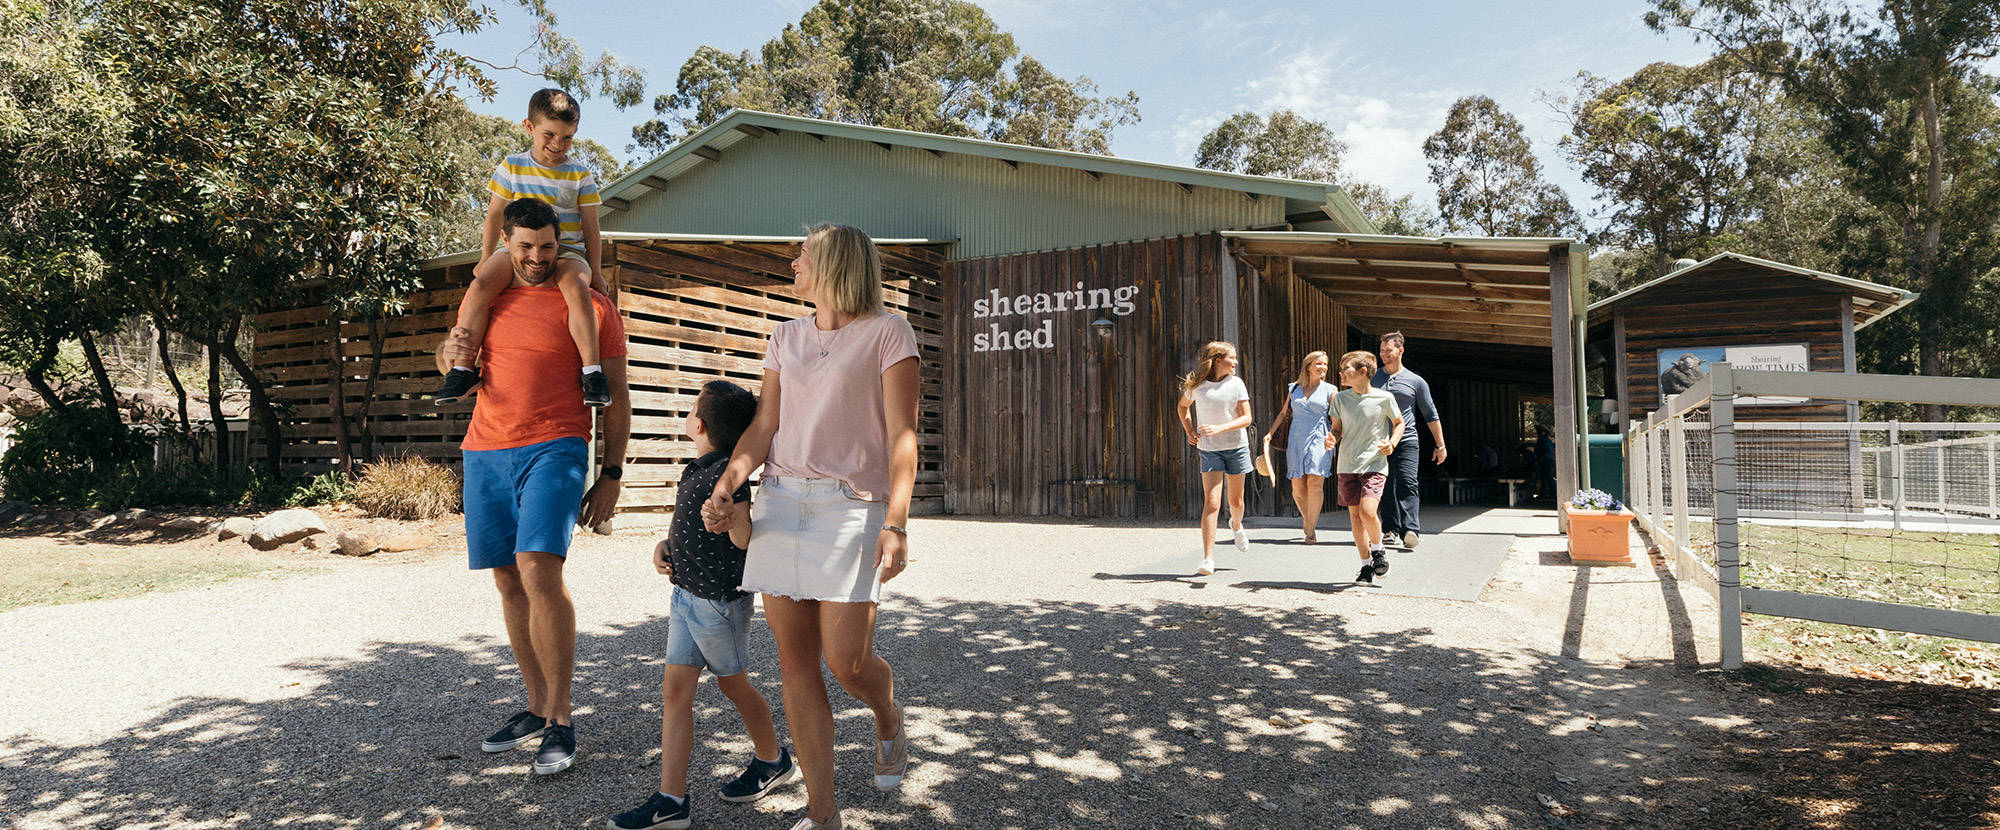 The Shearing Shed at Paradise Country